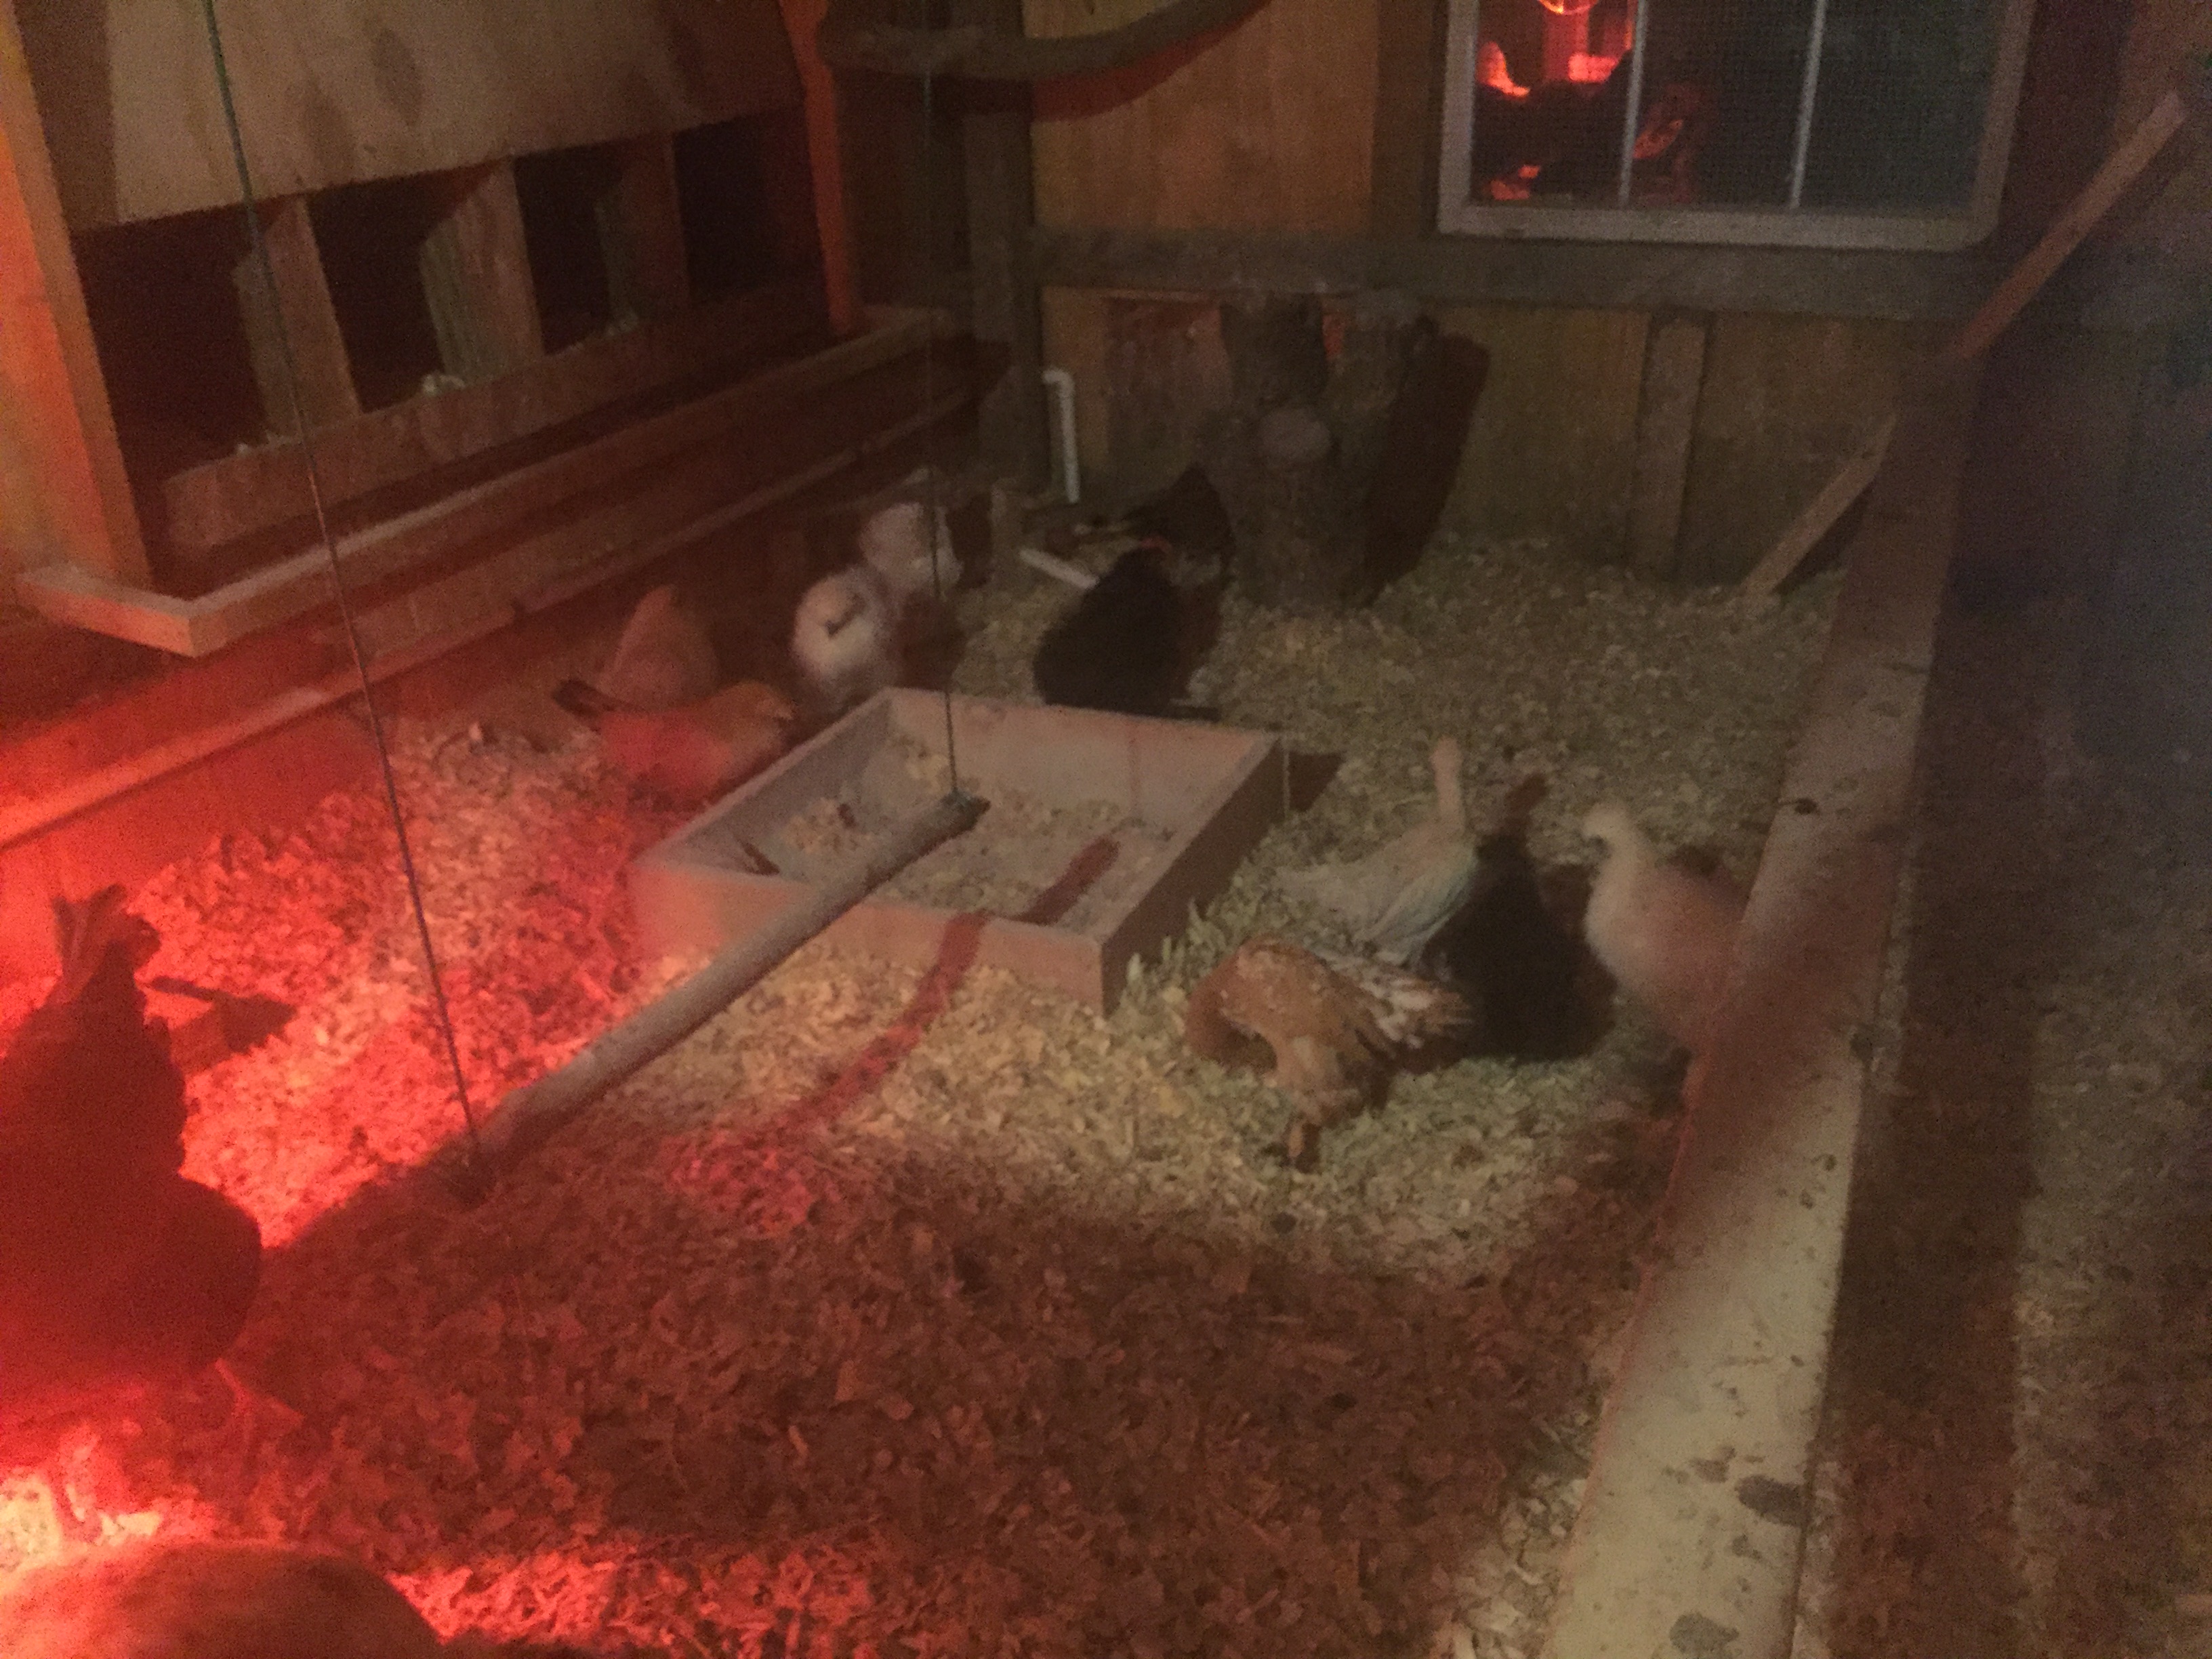 Cold December night. Had a heat lamp for a bit keeping bantams warm. Zero degrees outside....